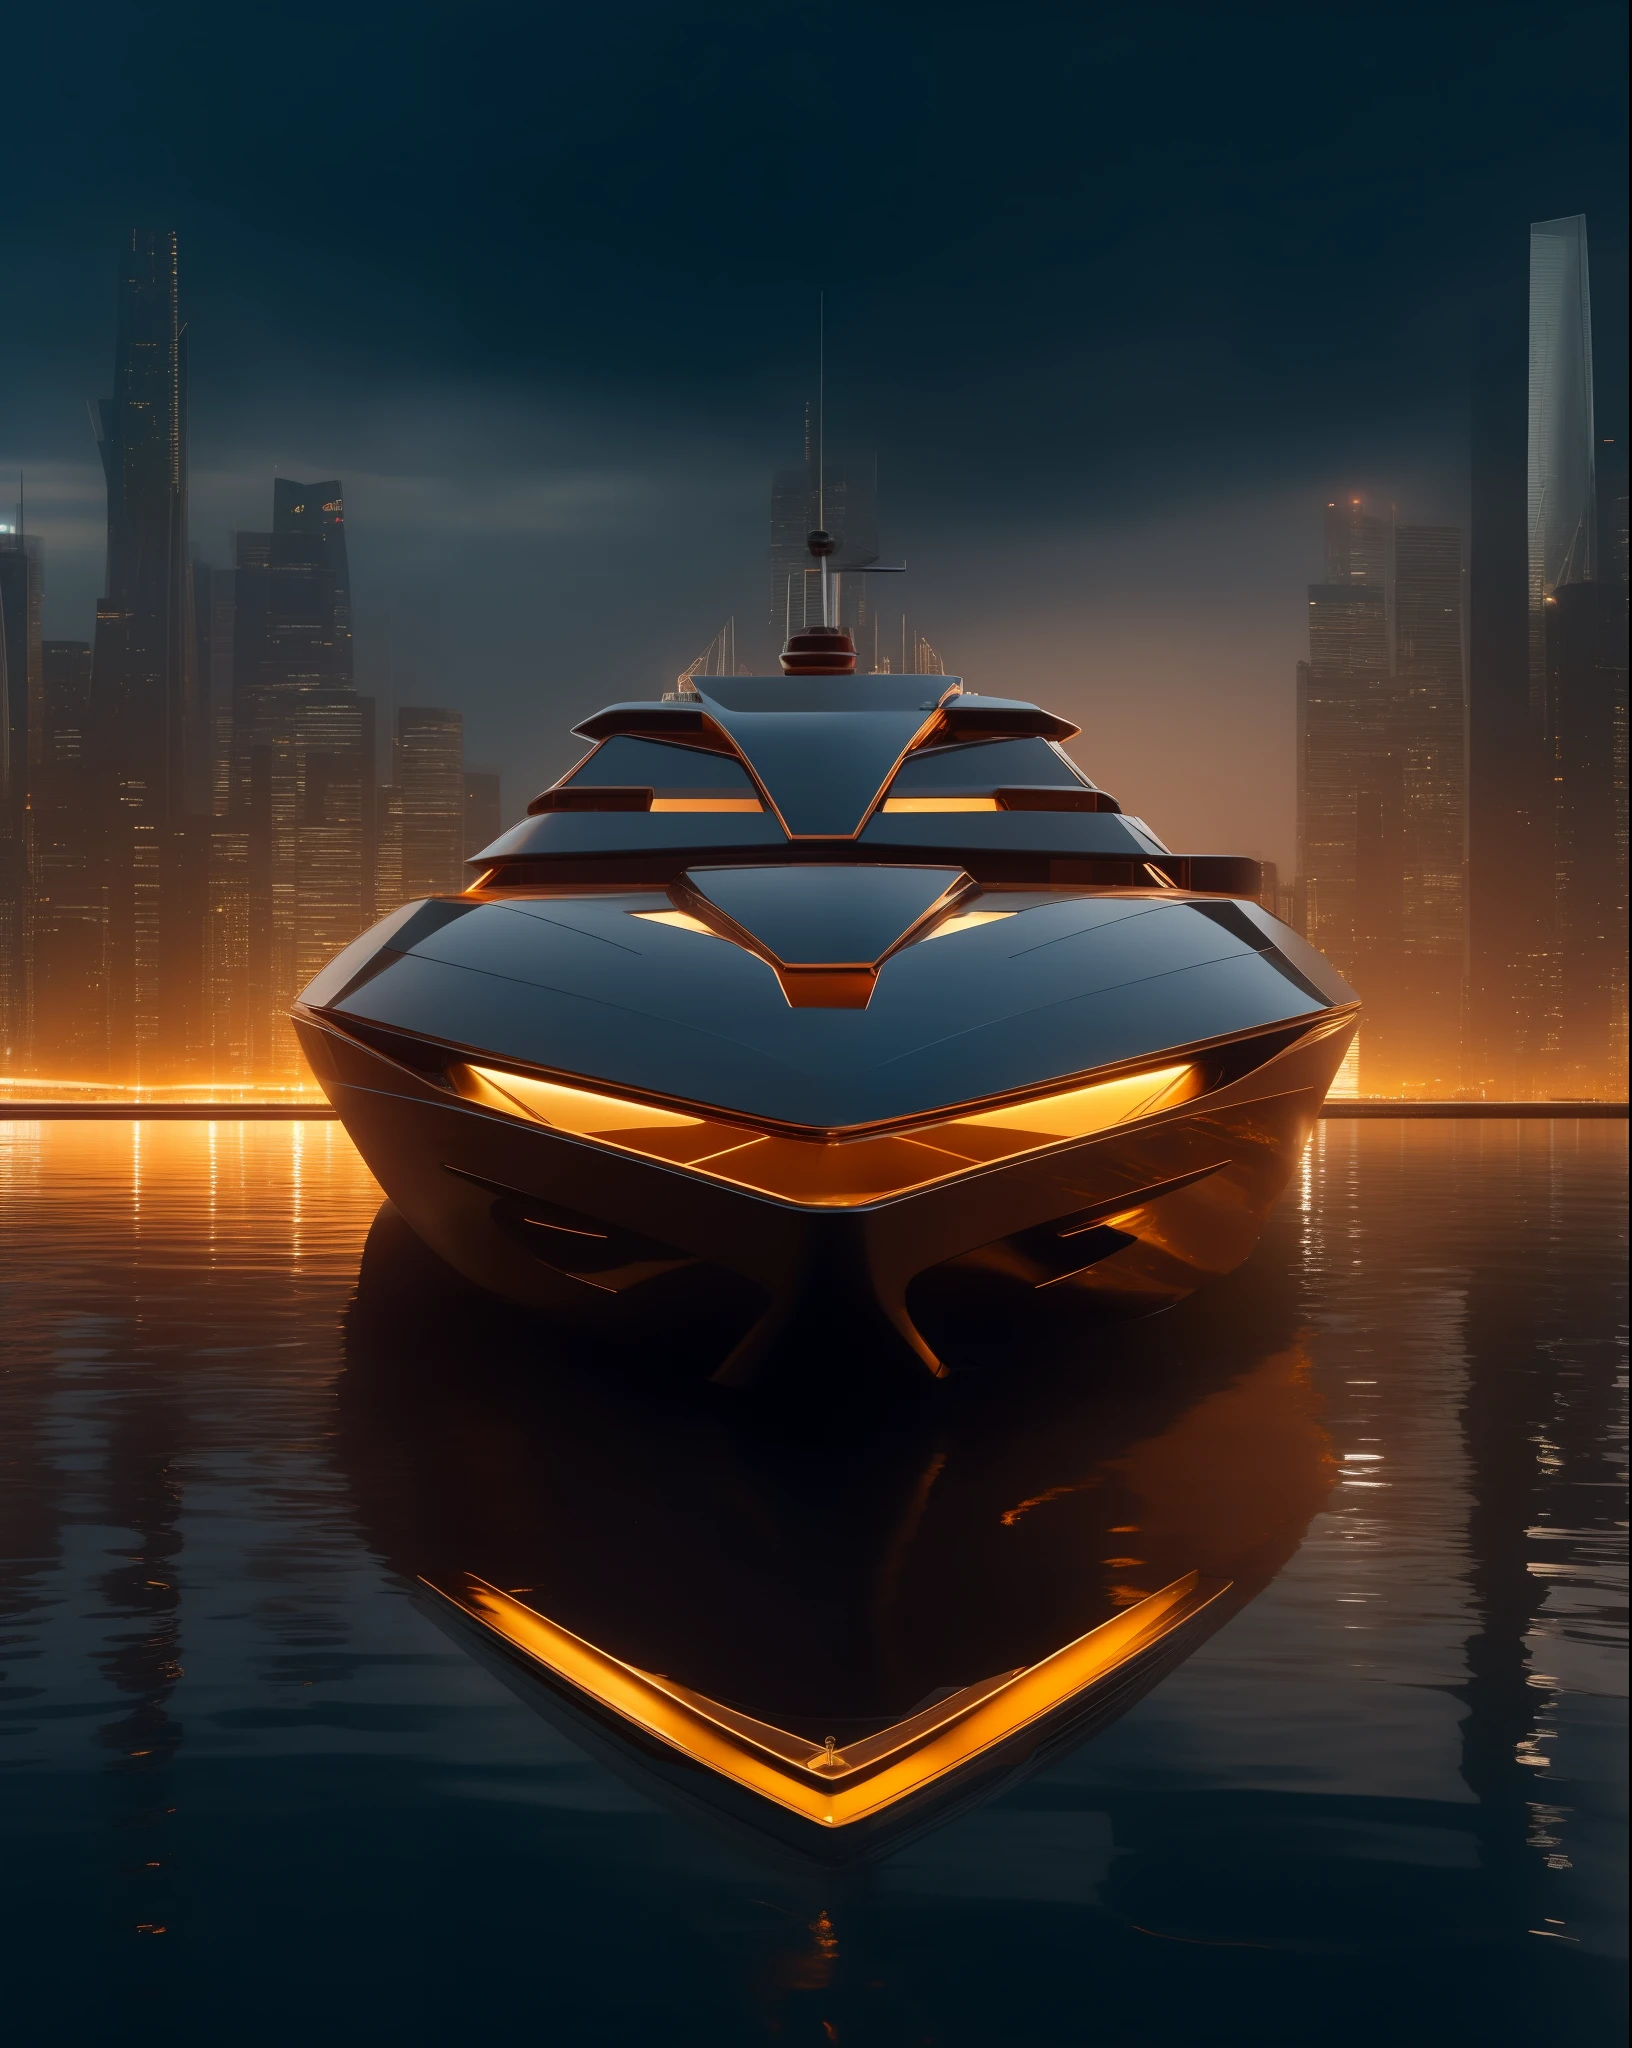 a close up of a boat in the water with a city in the background, cyberpunk speedboat, an iron man concept yacht, concept boat, style of raymond swanland, futuristic digital art, futuristic concept art, very futuristic, futuristic poster, art deco sci fi, in a futuristic city, futuristic digital painting, futuristic art, futuristic setting, high quality digital concept art